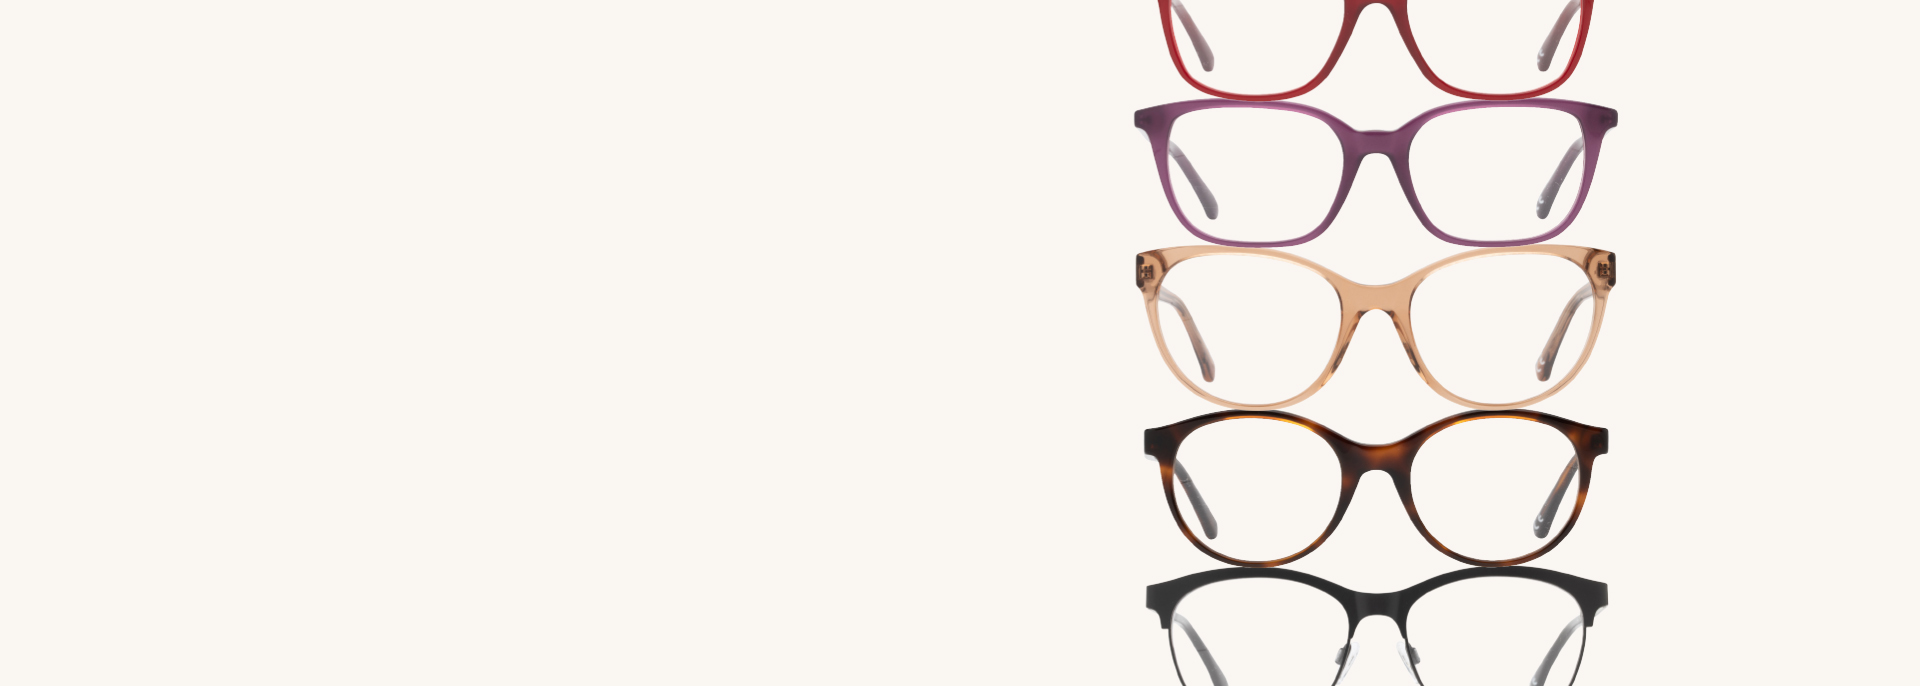 Basics Collection by Smarteyes